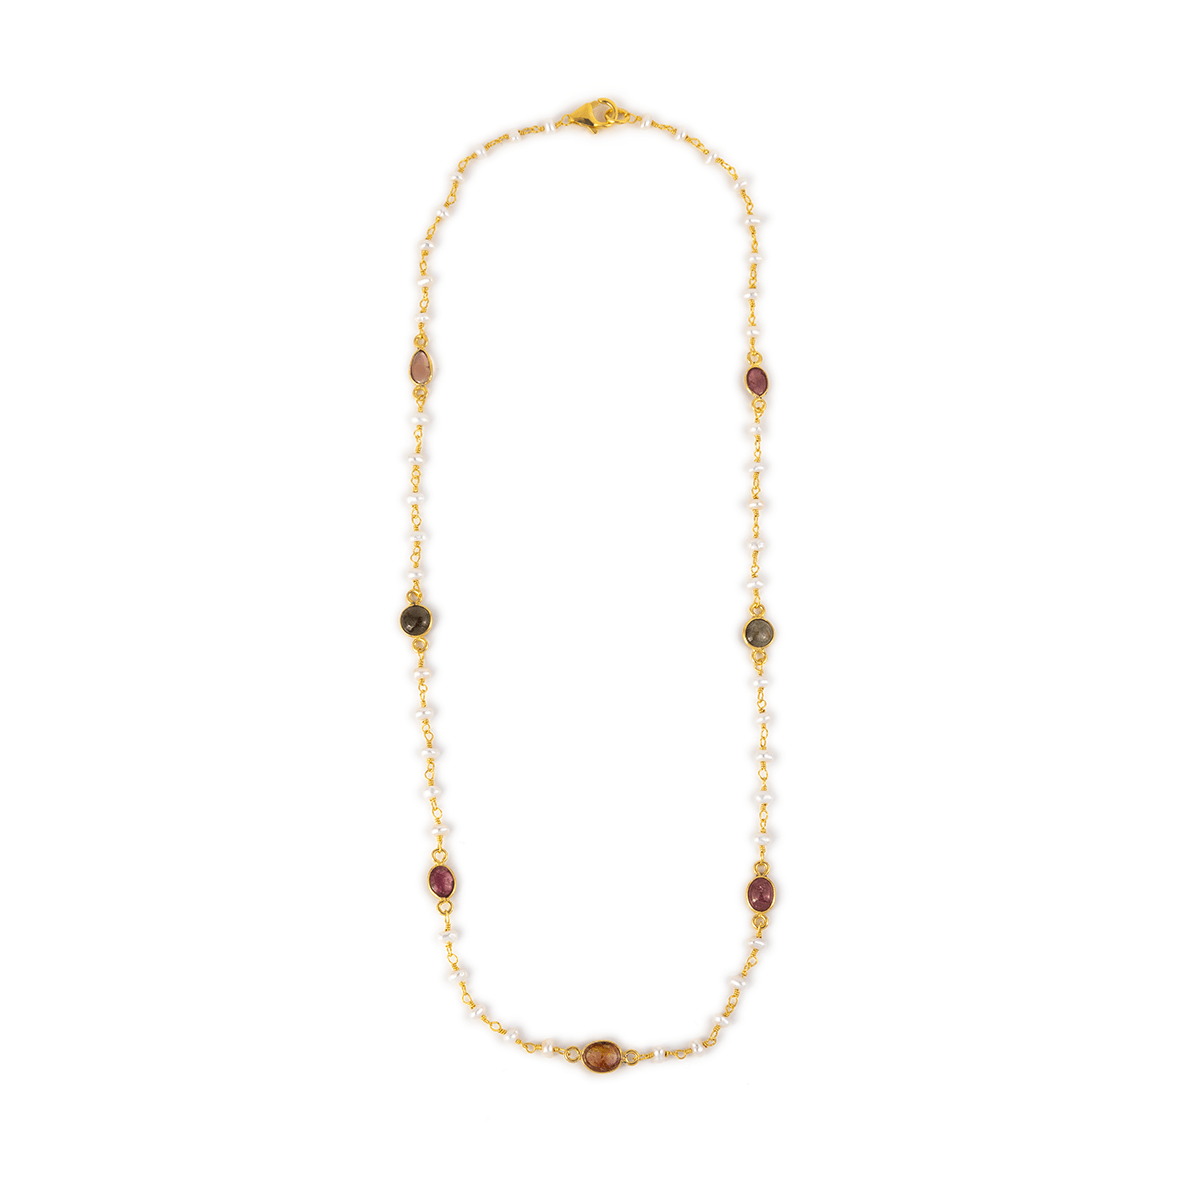 Tourmaline Necklace with Pearls - Sterling Silver and Gold Plated